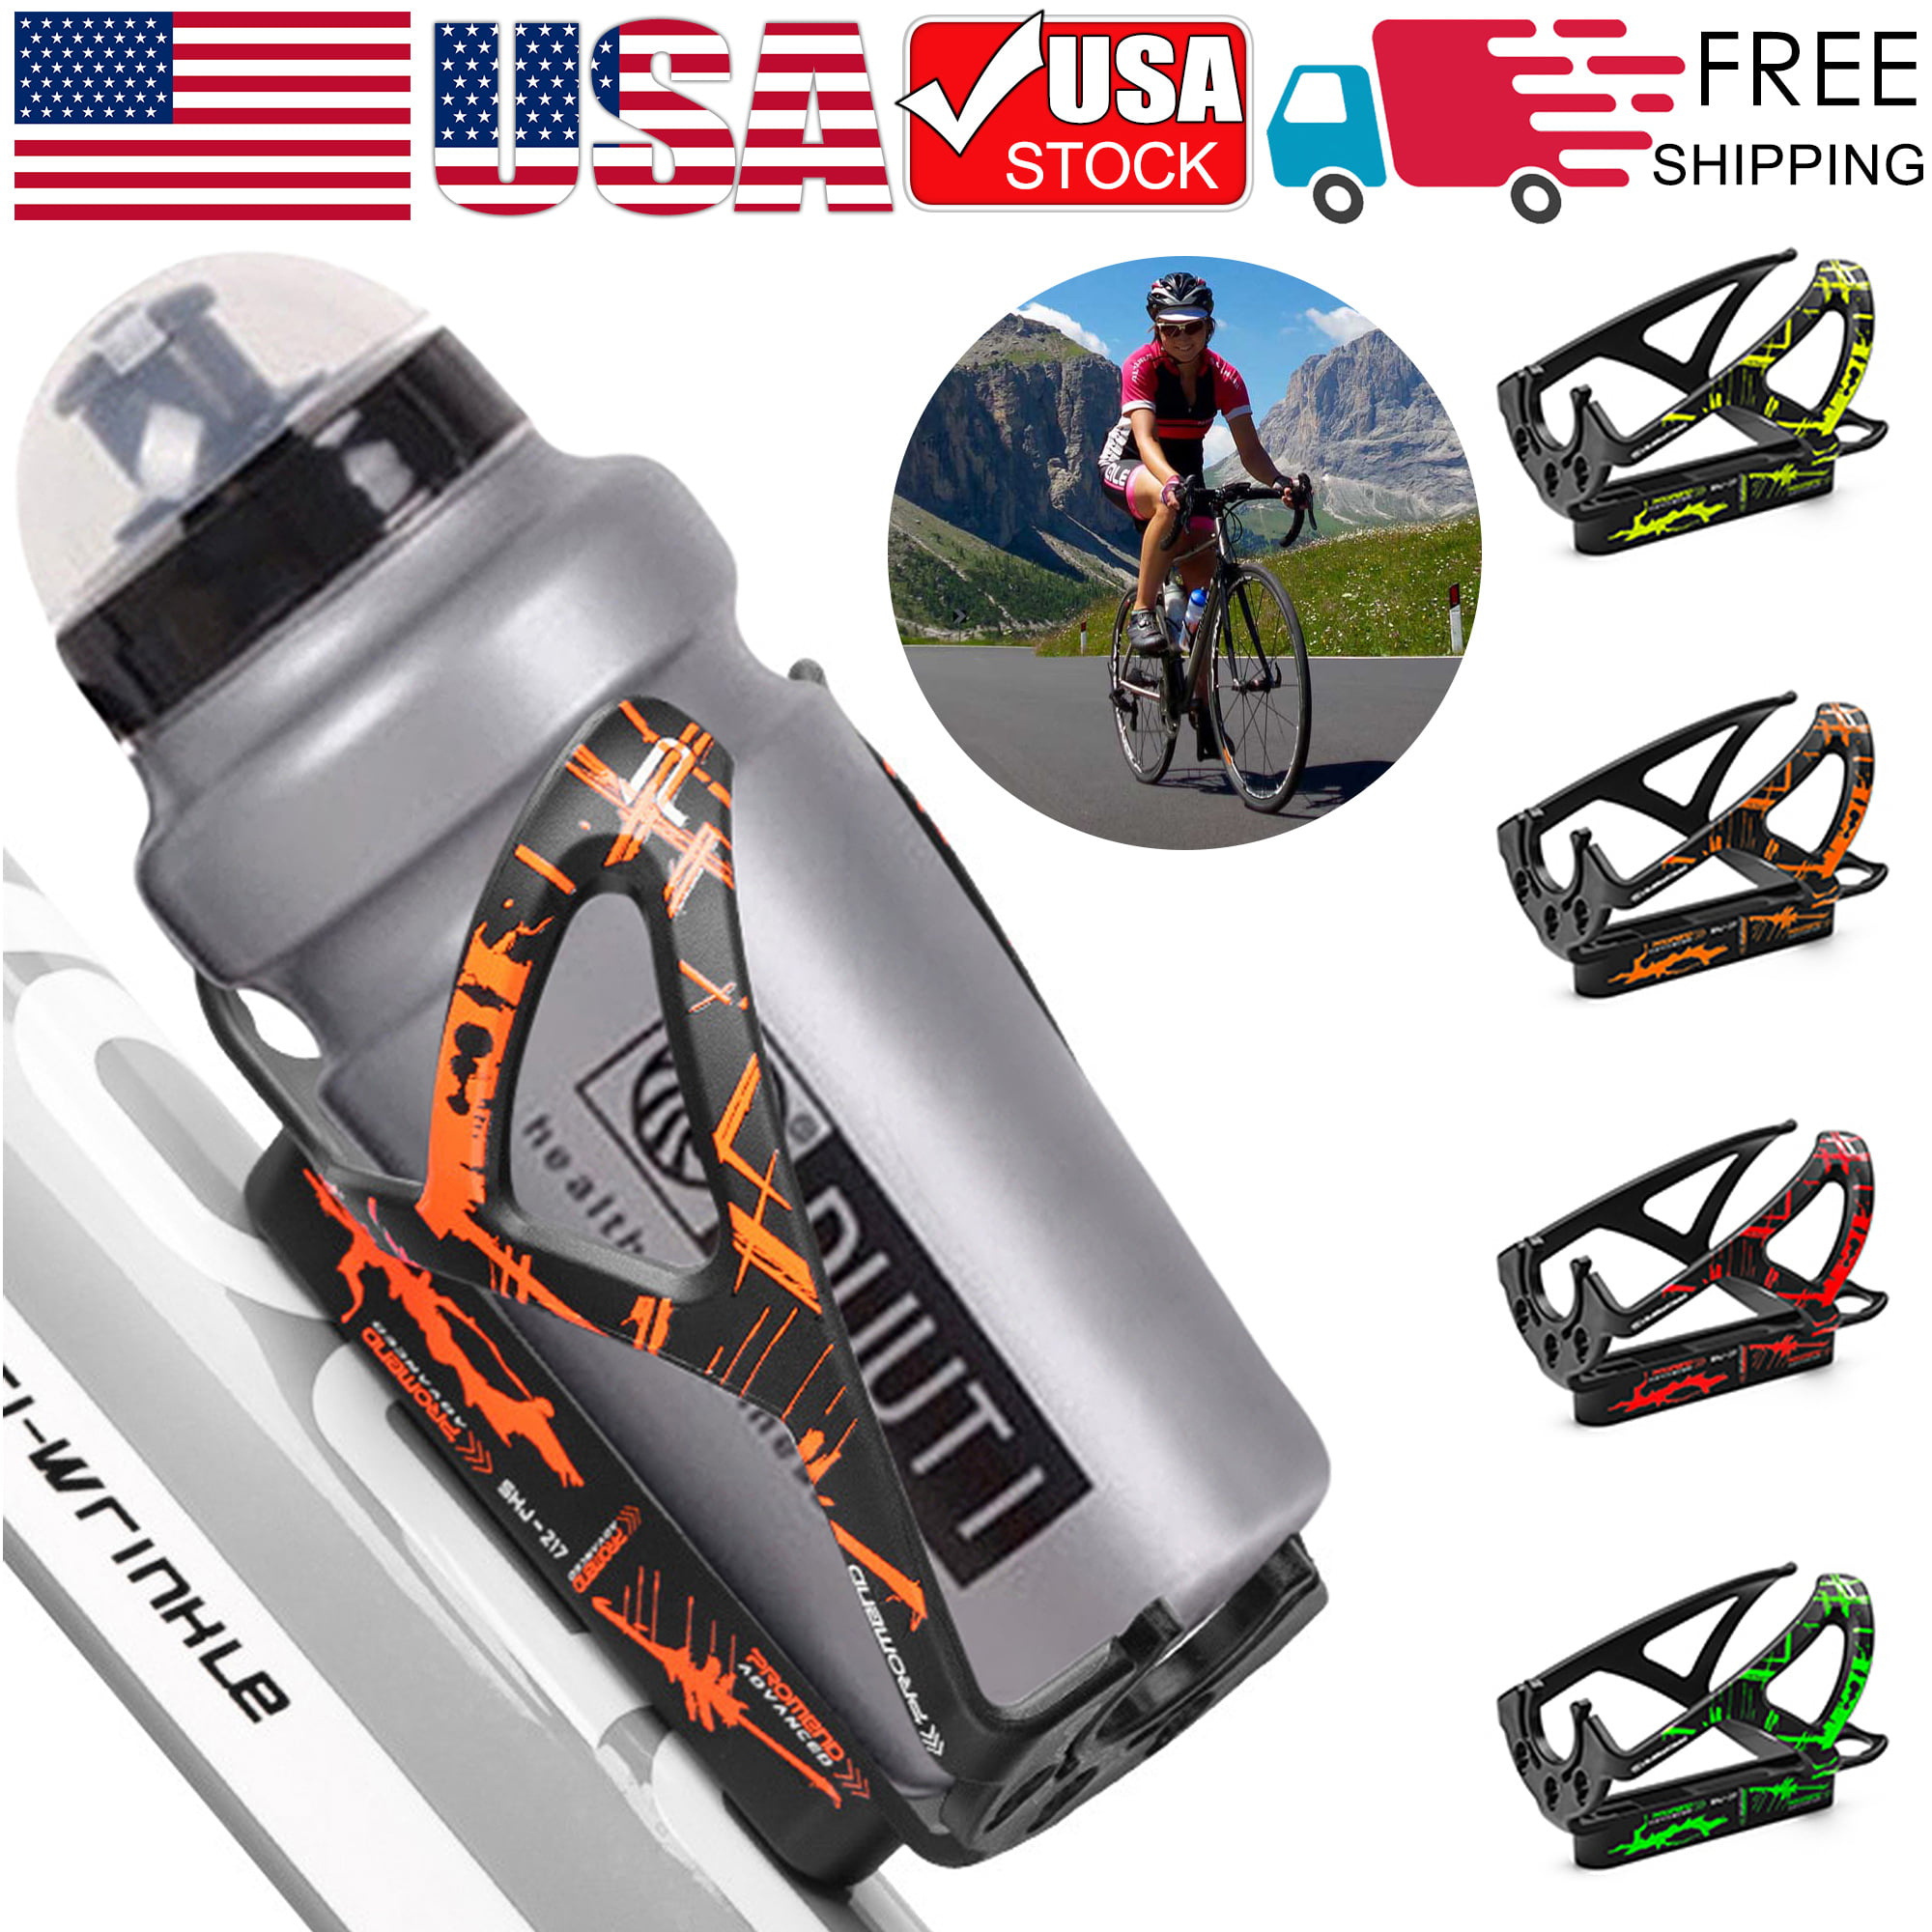 NEW Bicycle cycling water bottle cage holder bracket 